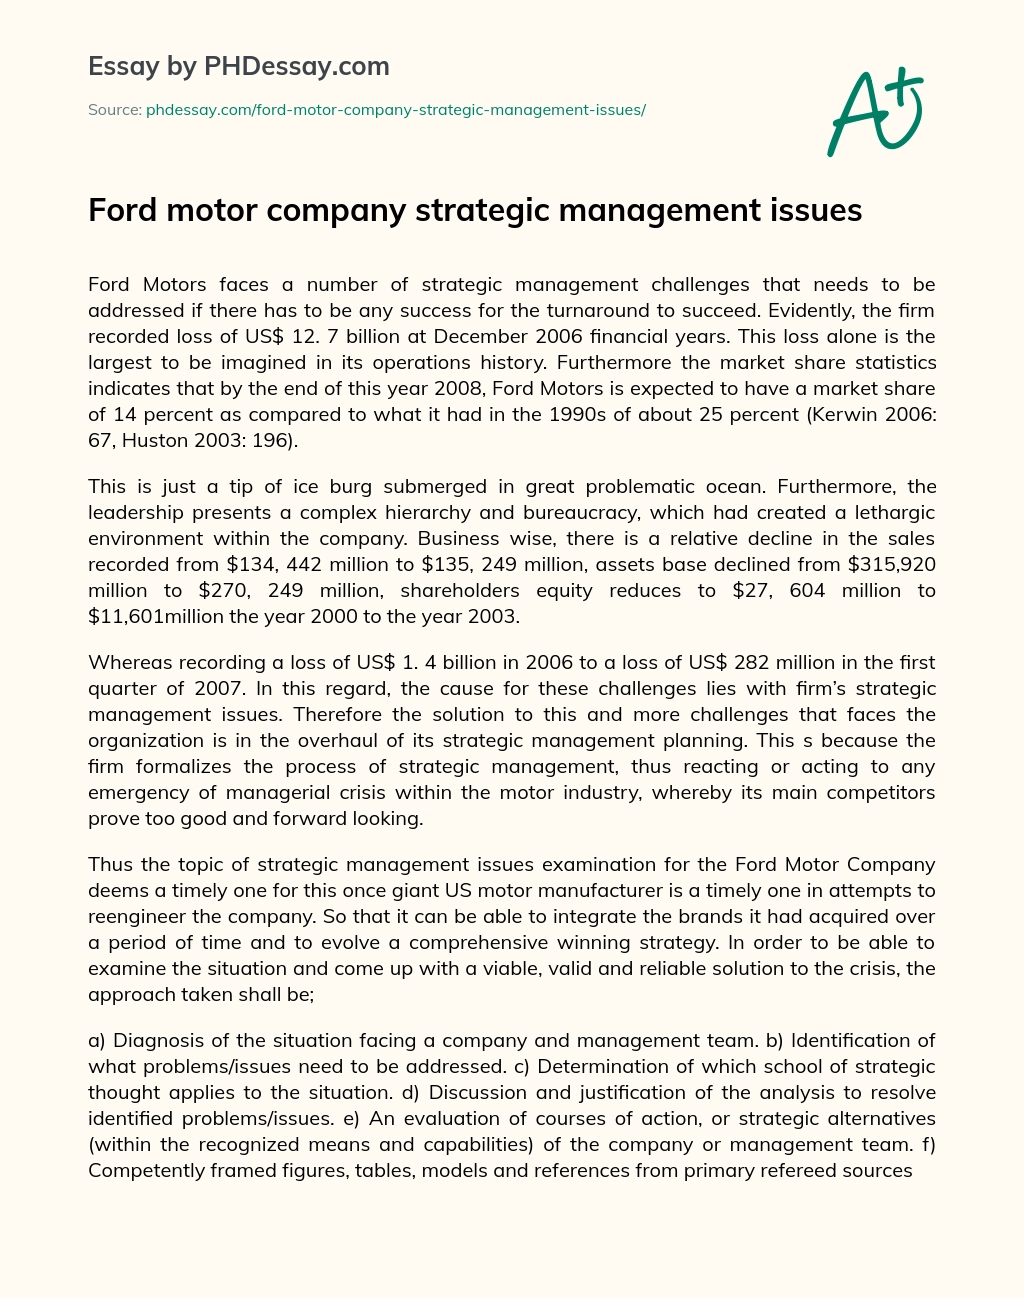 Ford motor company strategic management issues essay